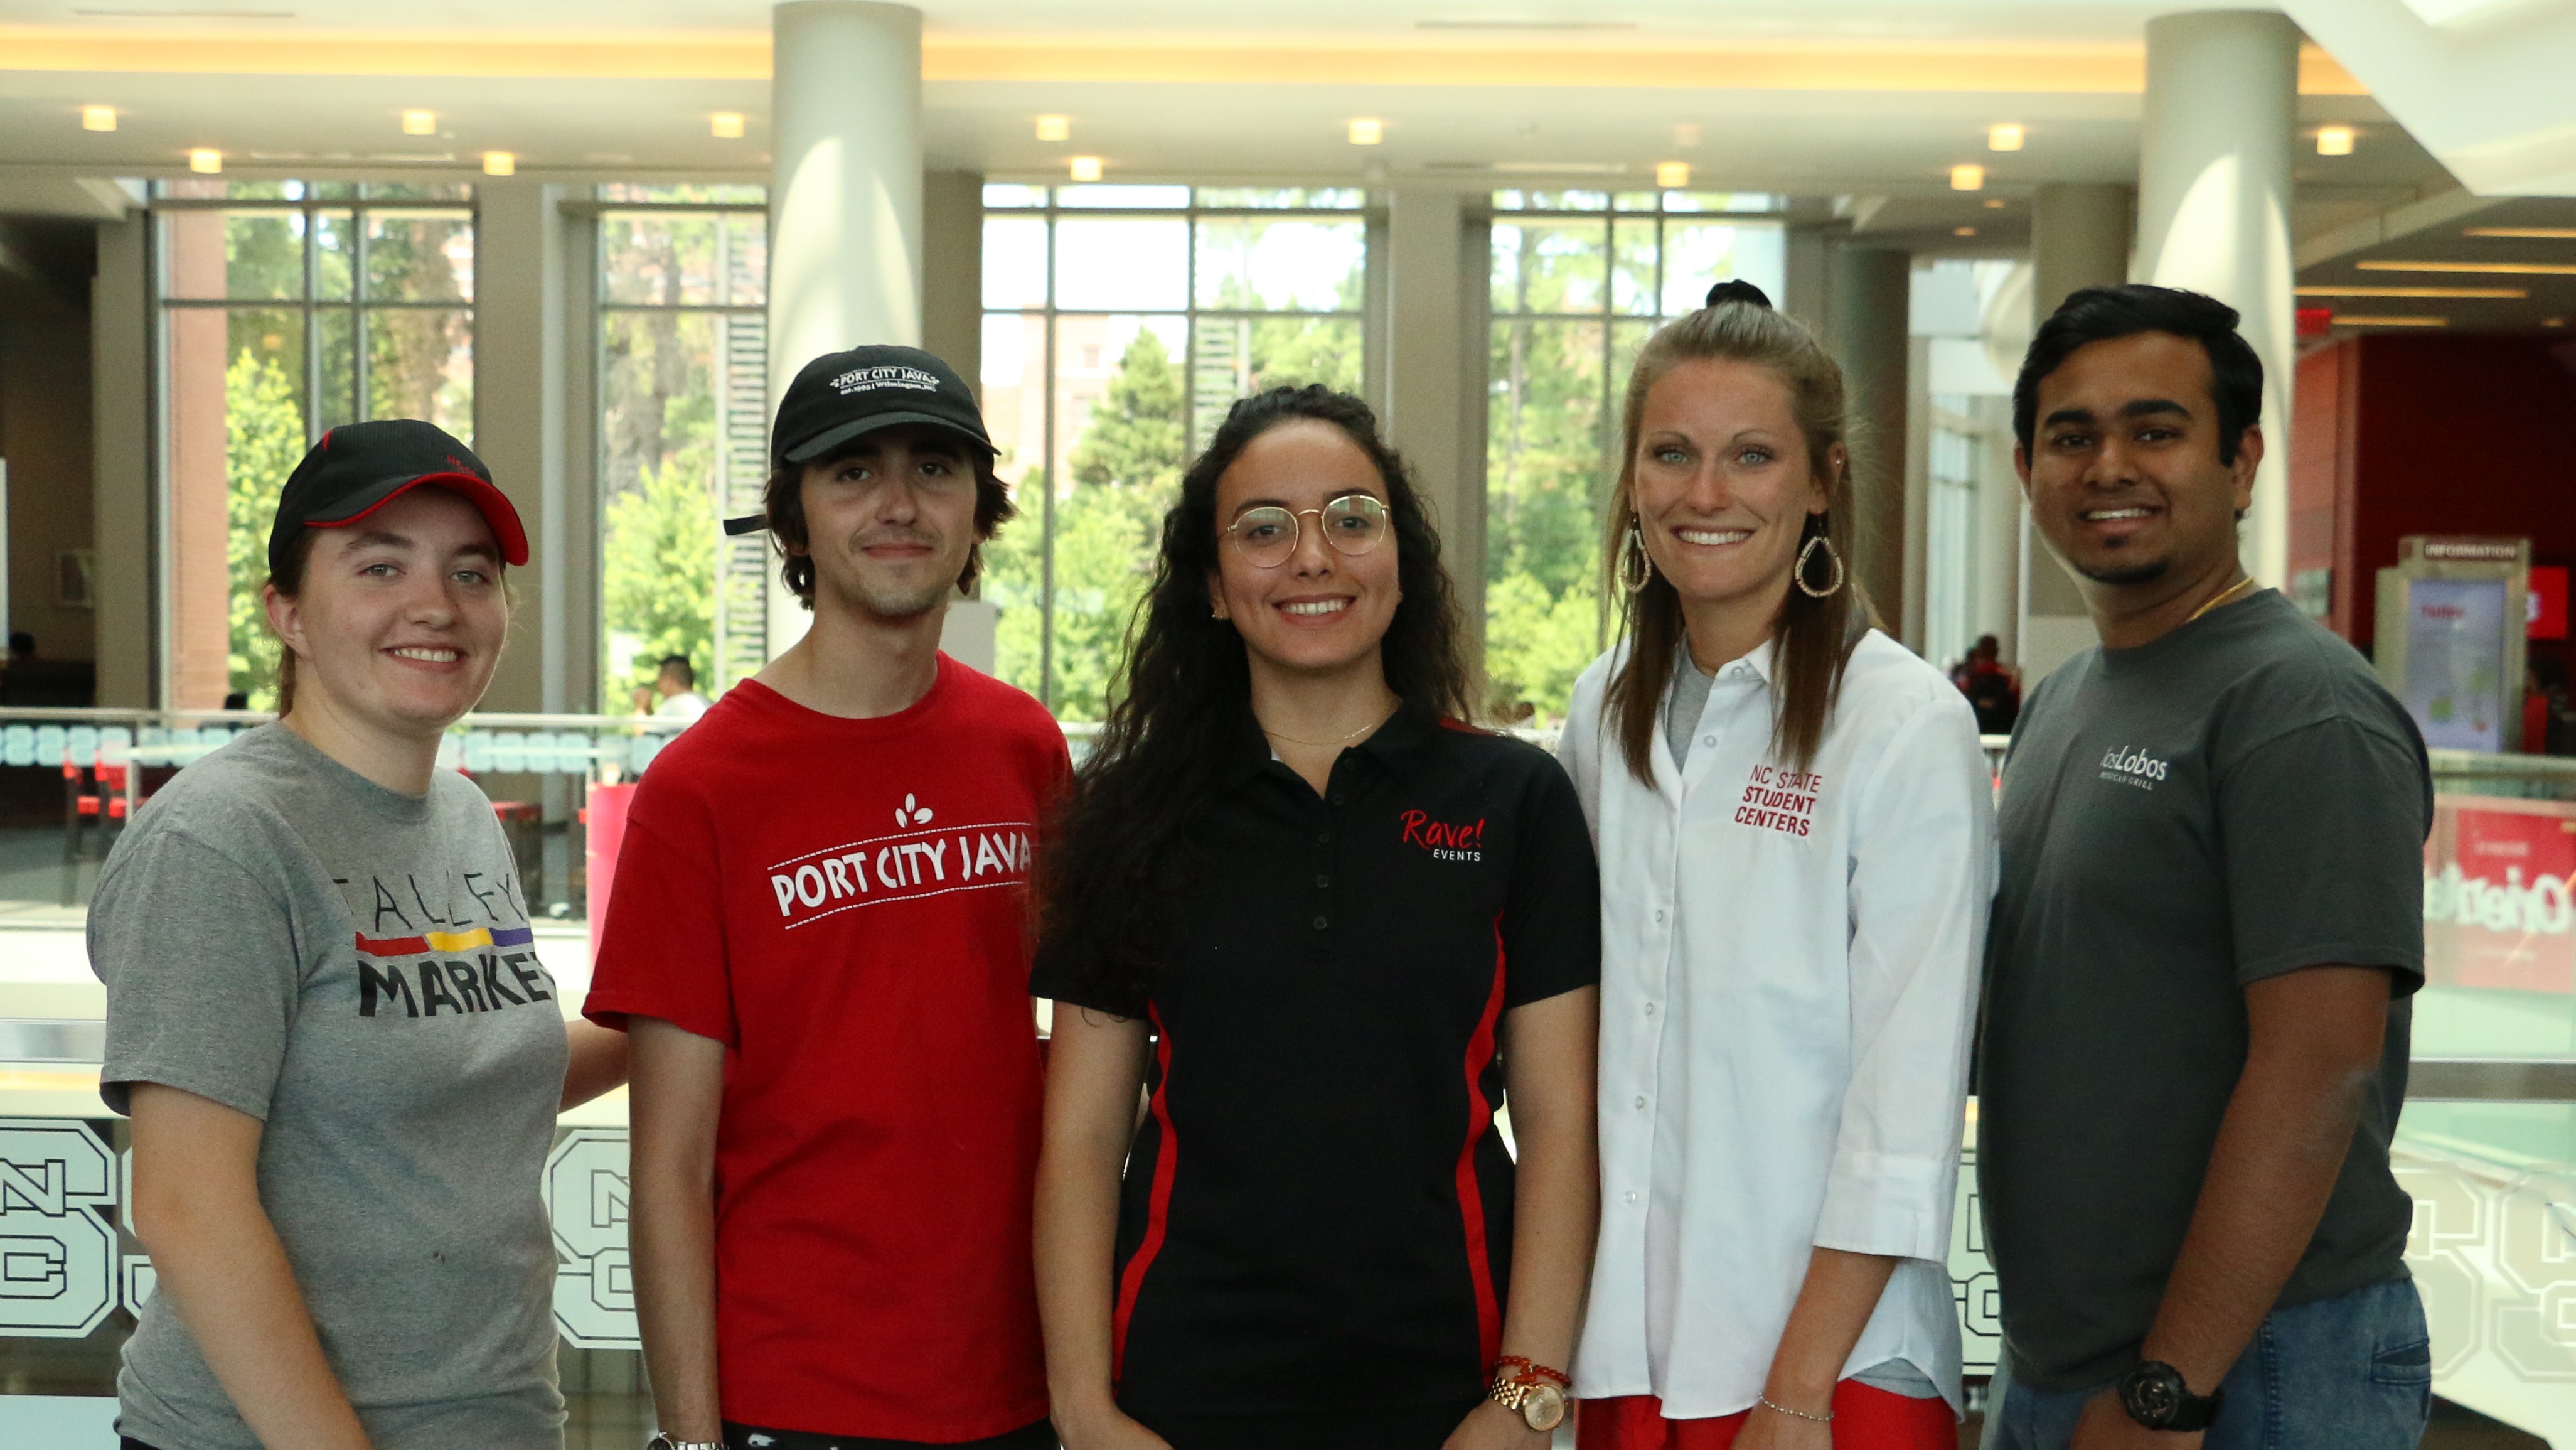 Group of Campus Enterprises student employees in Talley